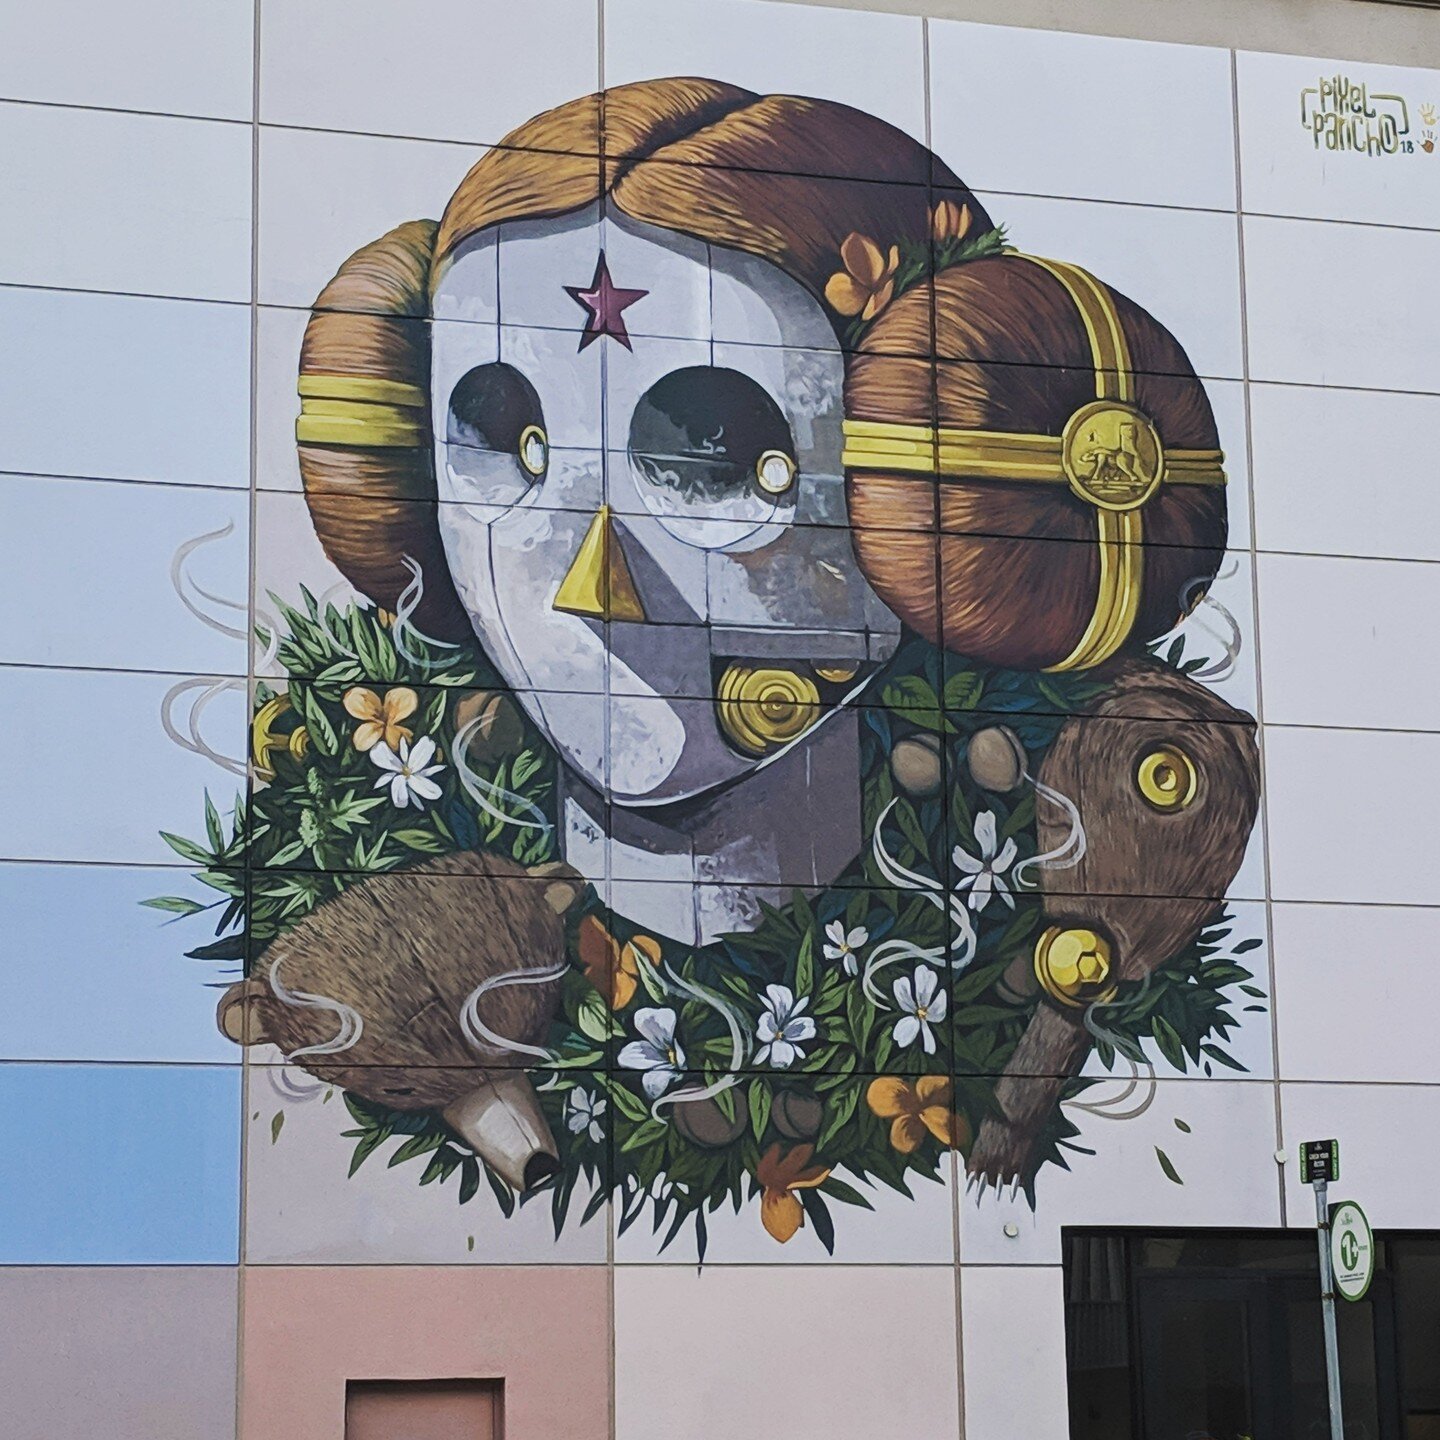 May the 4th be with you today :)
.
We offer biking (and walking!) tours of Sacramento and the surrounding area, always tailored to the client - whether you want murals (like this awesome one from @pixelpancho on J Steet), history, architecture, or th